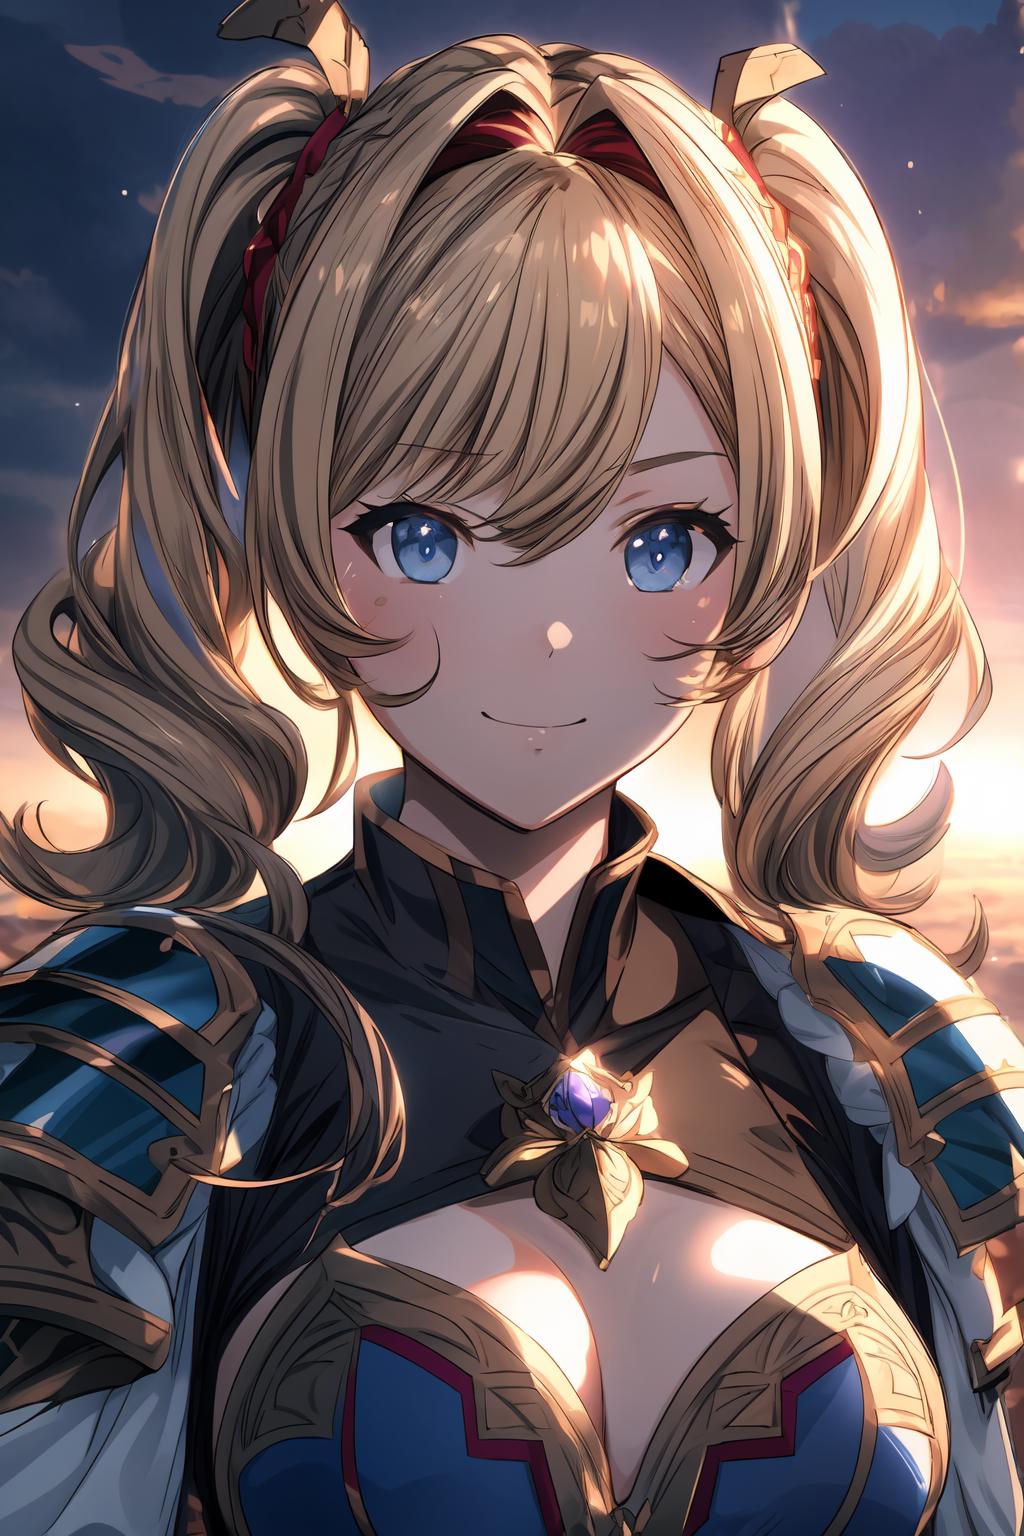 [Character] Zeta (Granblue Fantasy) image by deatharms2010